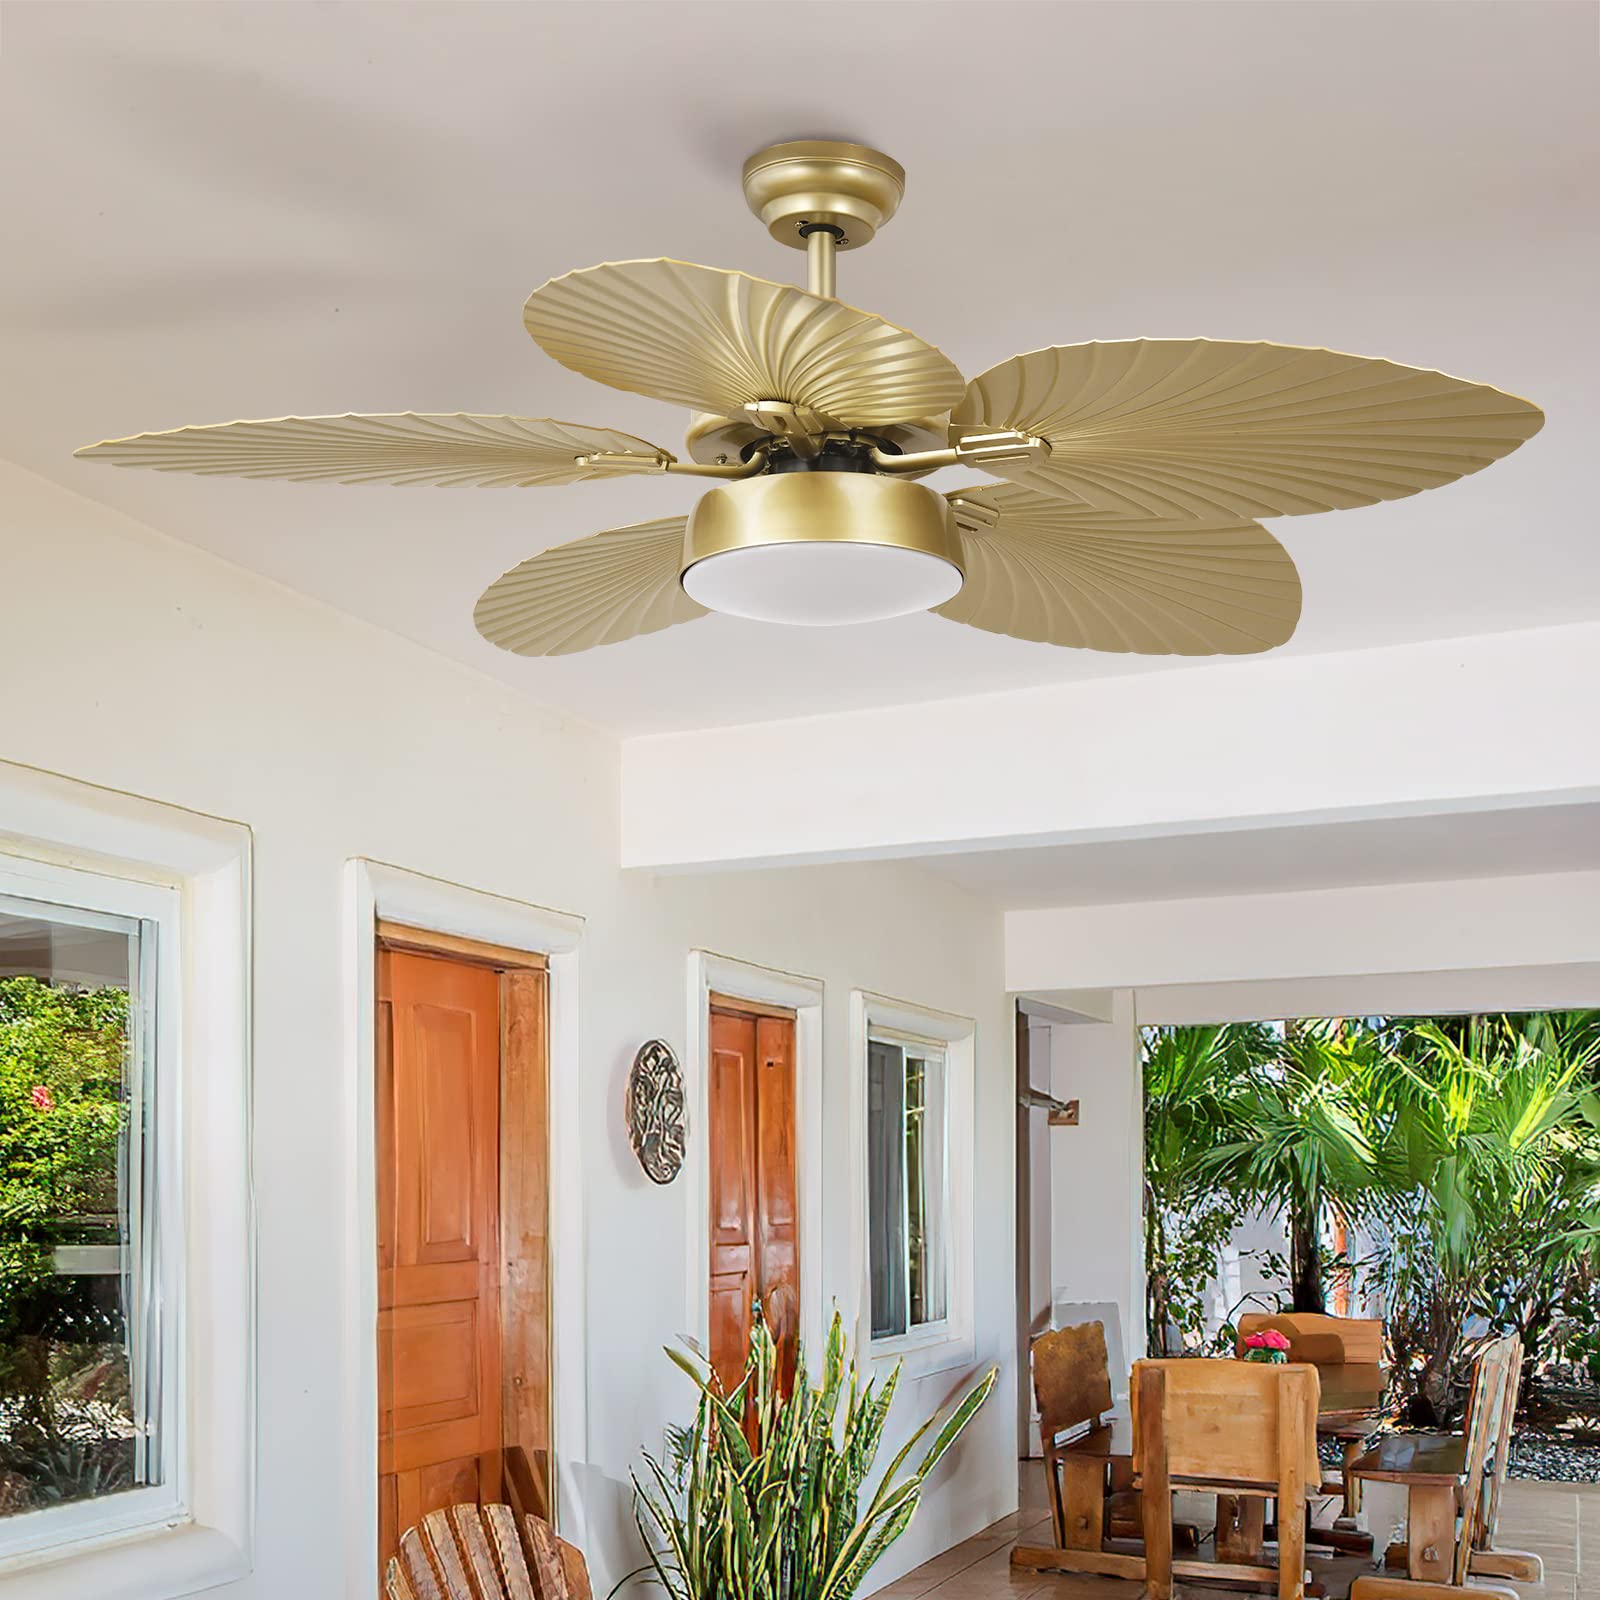 YITAHOME Tropical Ceiling Fans with Light and Remote, 52 Inch Fan Light with Memory Function, Lights Colors Changing, Quiet Motor, Timer, Palm Leaf Blades for Outdoor/Indoor - Gold